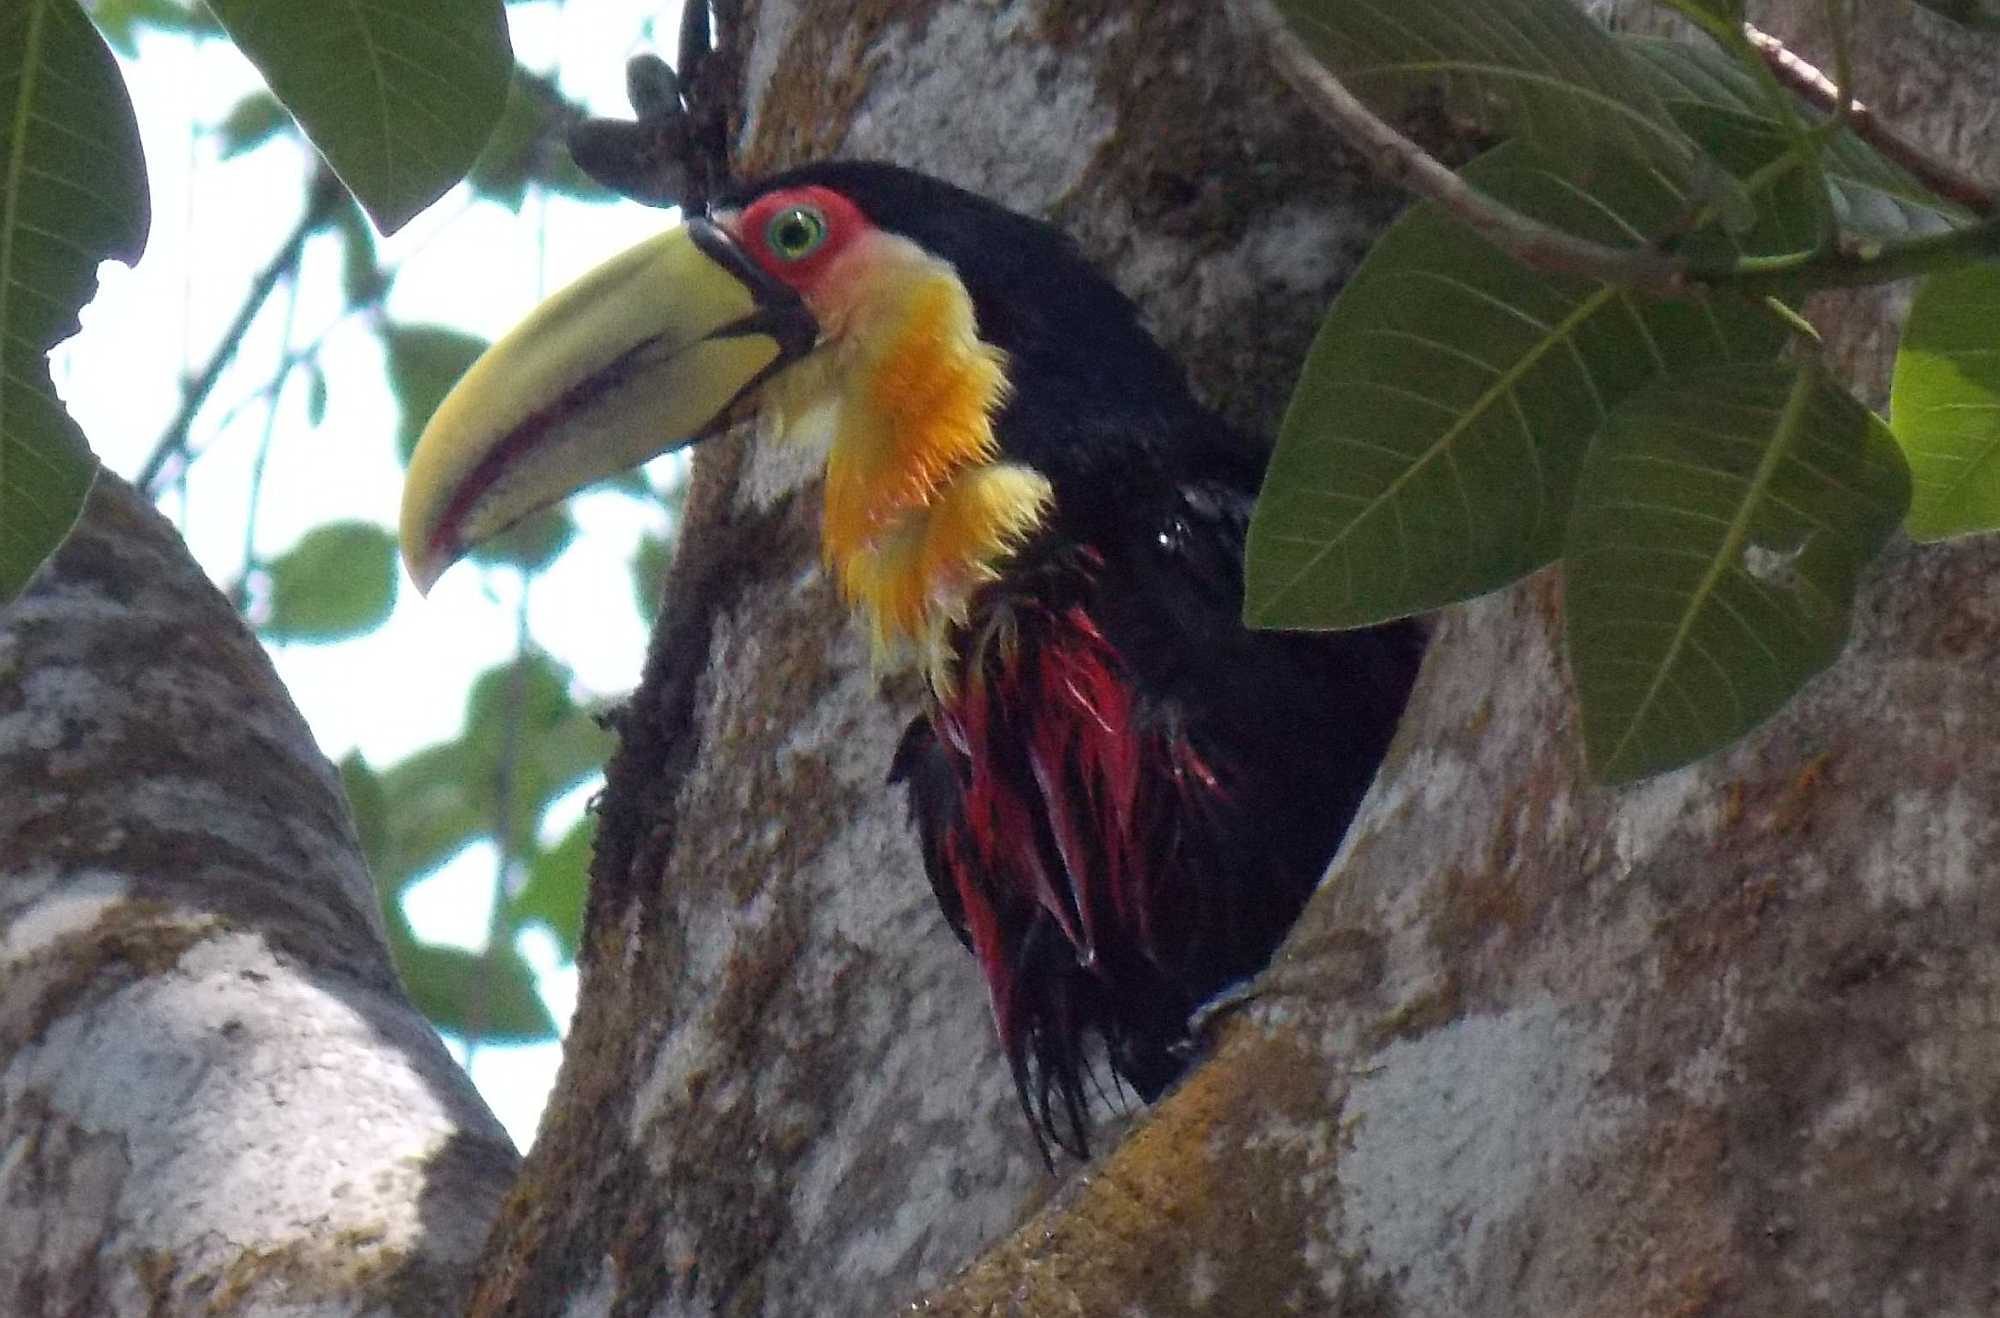 Brazil's national bird, the toucan, in the Amazon forest